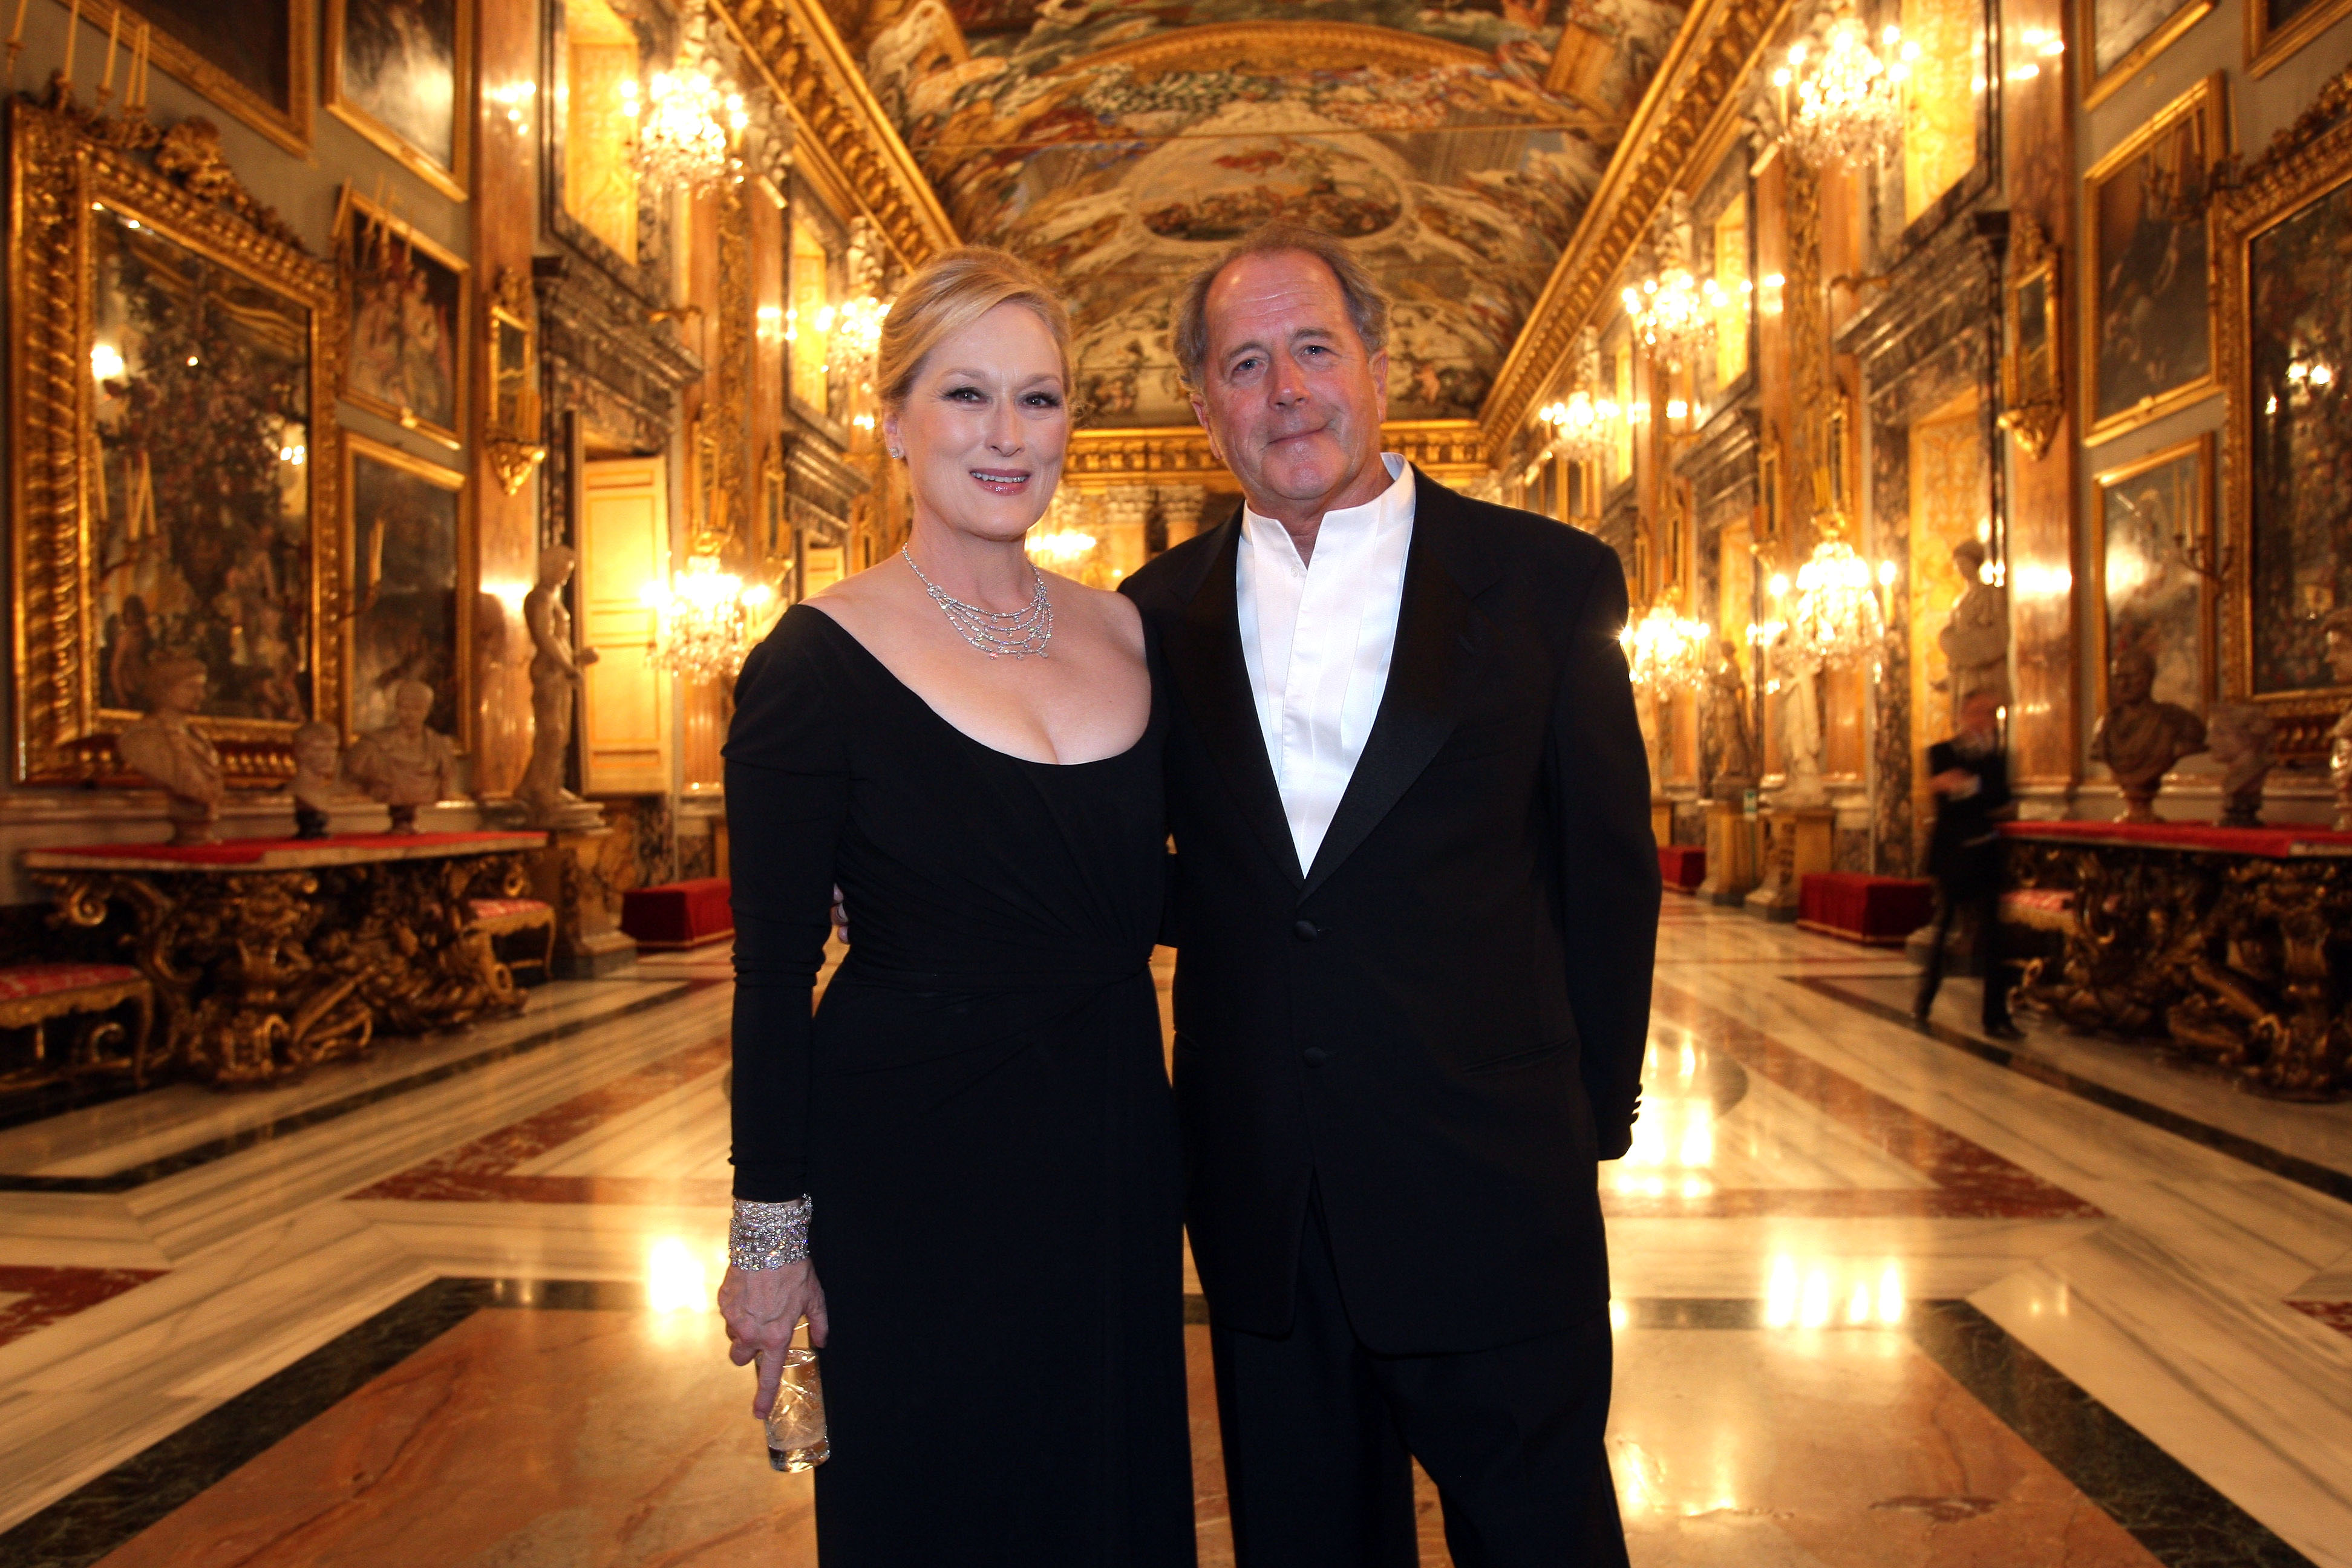 Meryl Streep and Don Gummer at the gala dinner in honor of Streep during the 4th International Rome Film Festival in Rome, Italy on October 23, 2009 | Source: Getty Images